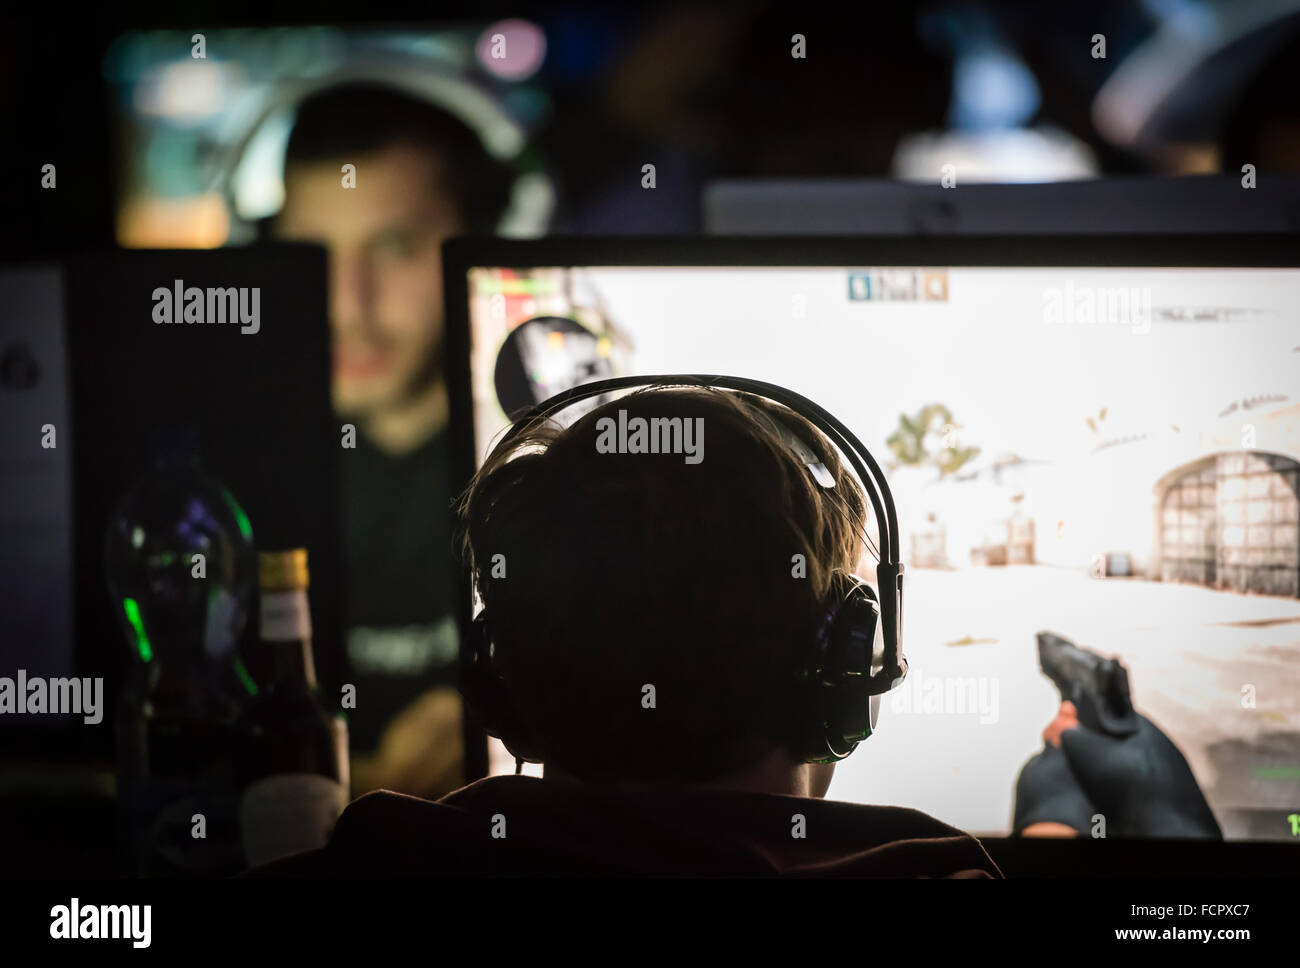 A computer game player is playing the first person shooter 'Counterstrike CS:GO' at a computer game convention. Stock Photo